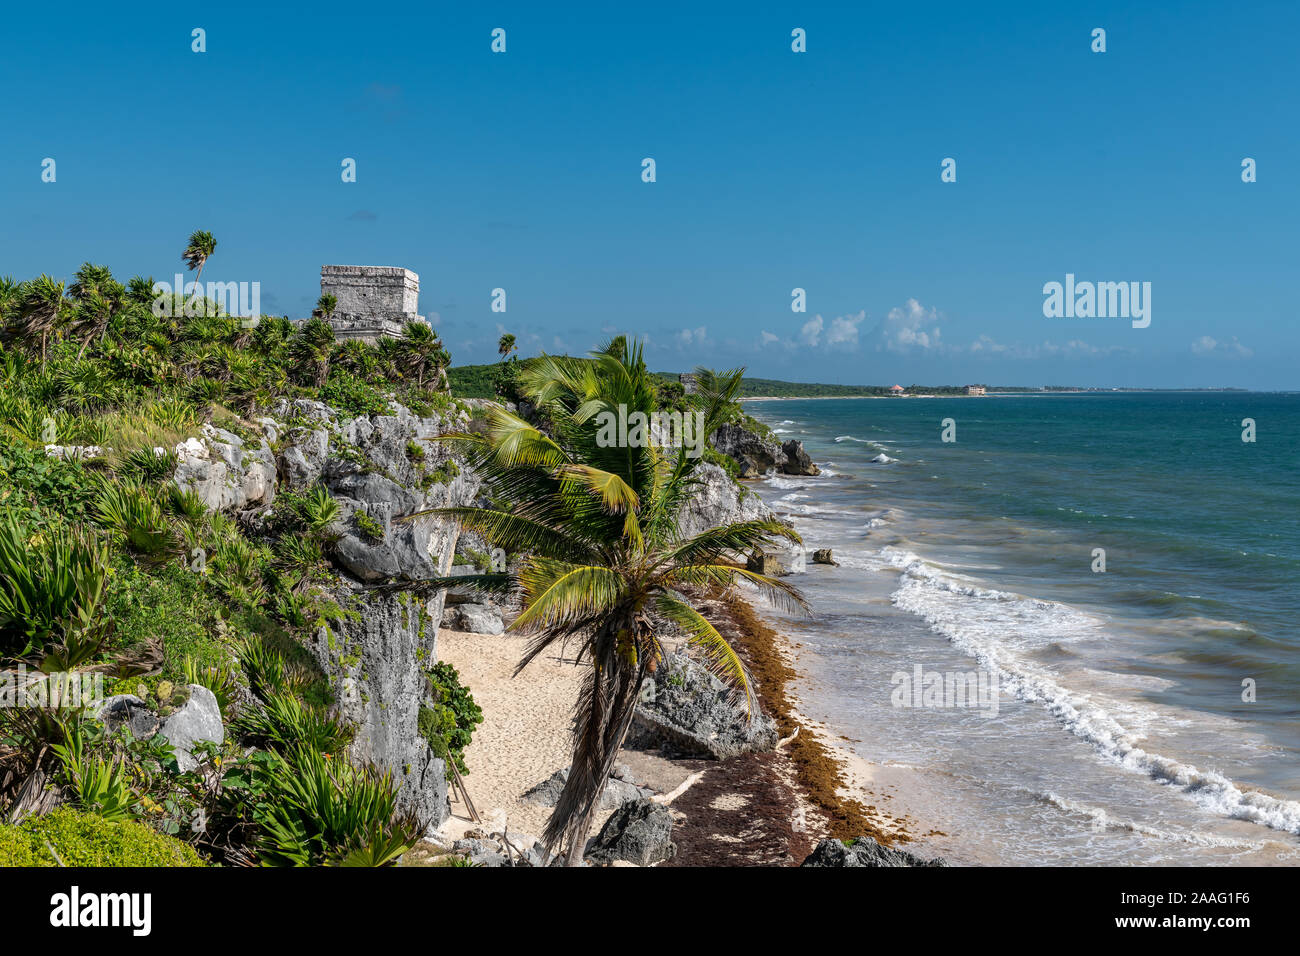 Beautiful beach in Tulum Mexico, Mayan ruins on top of the cliff. Stock Photo